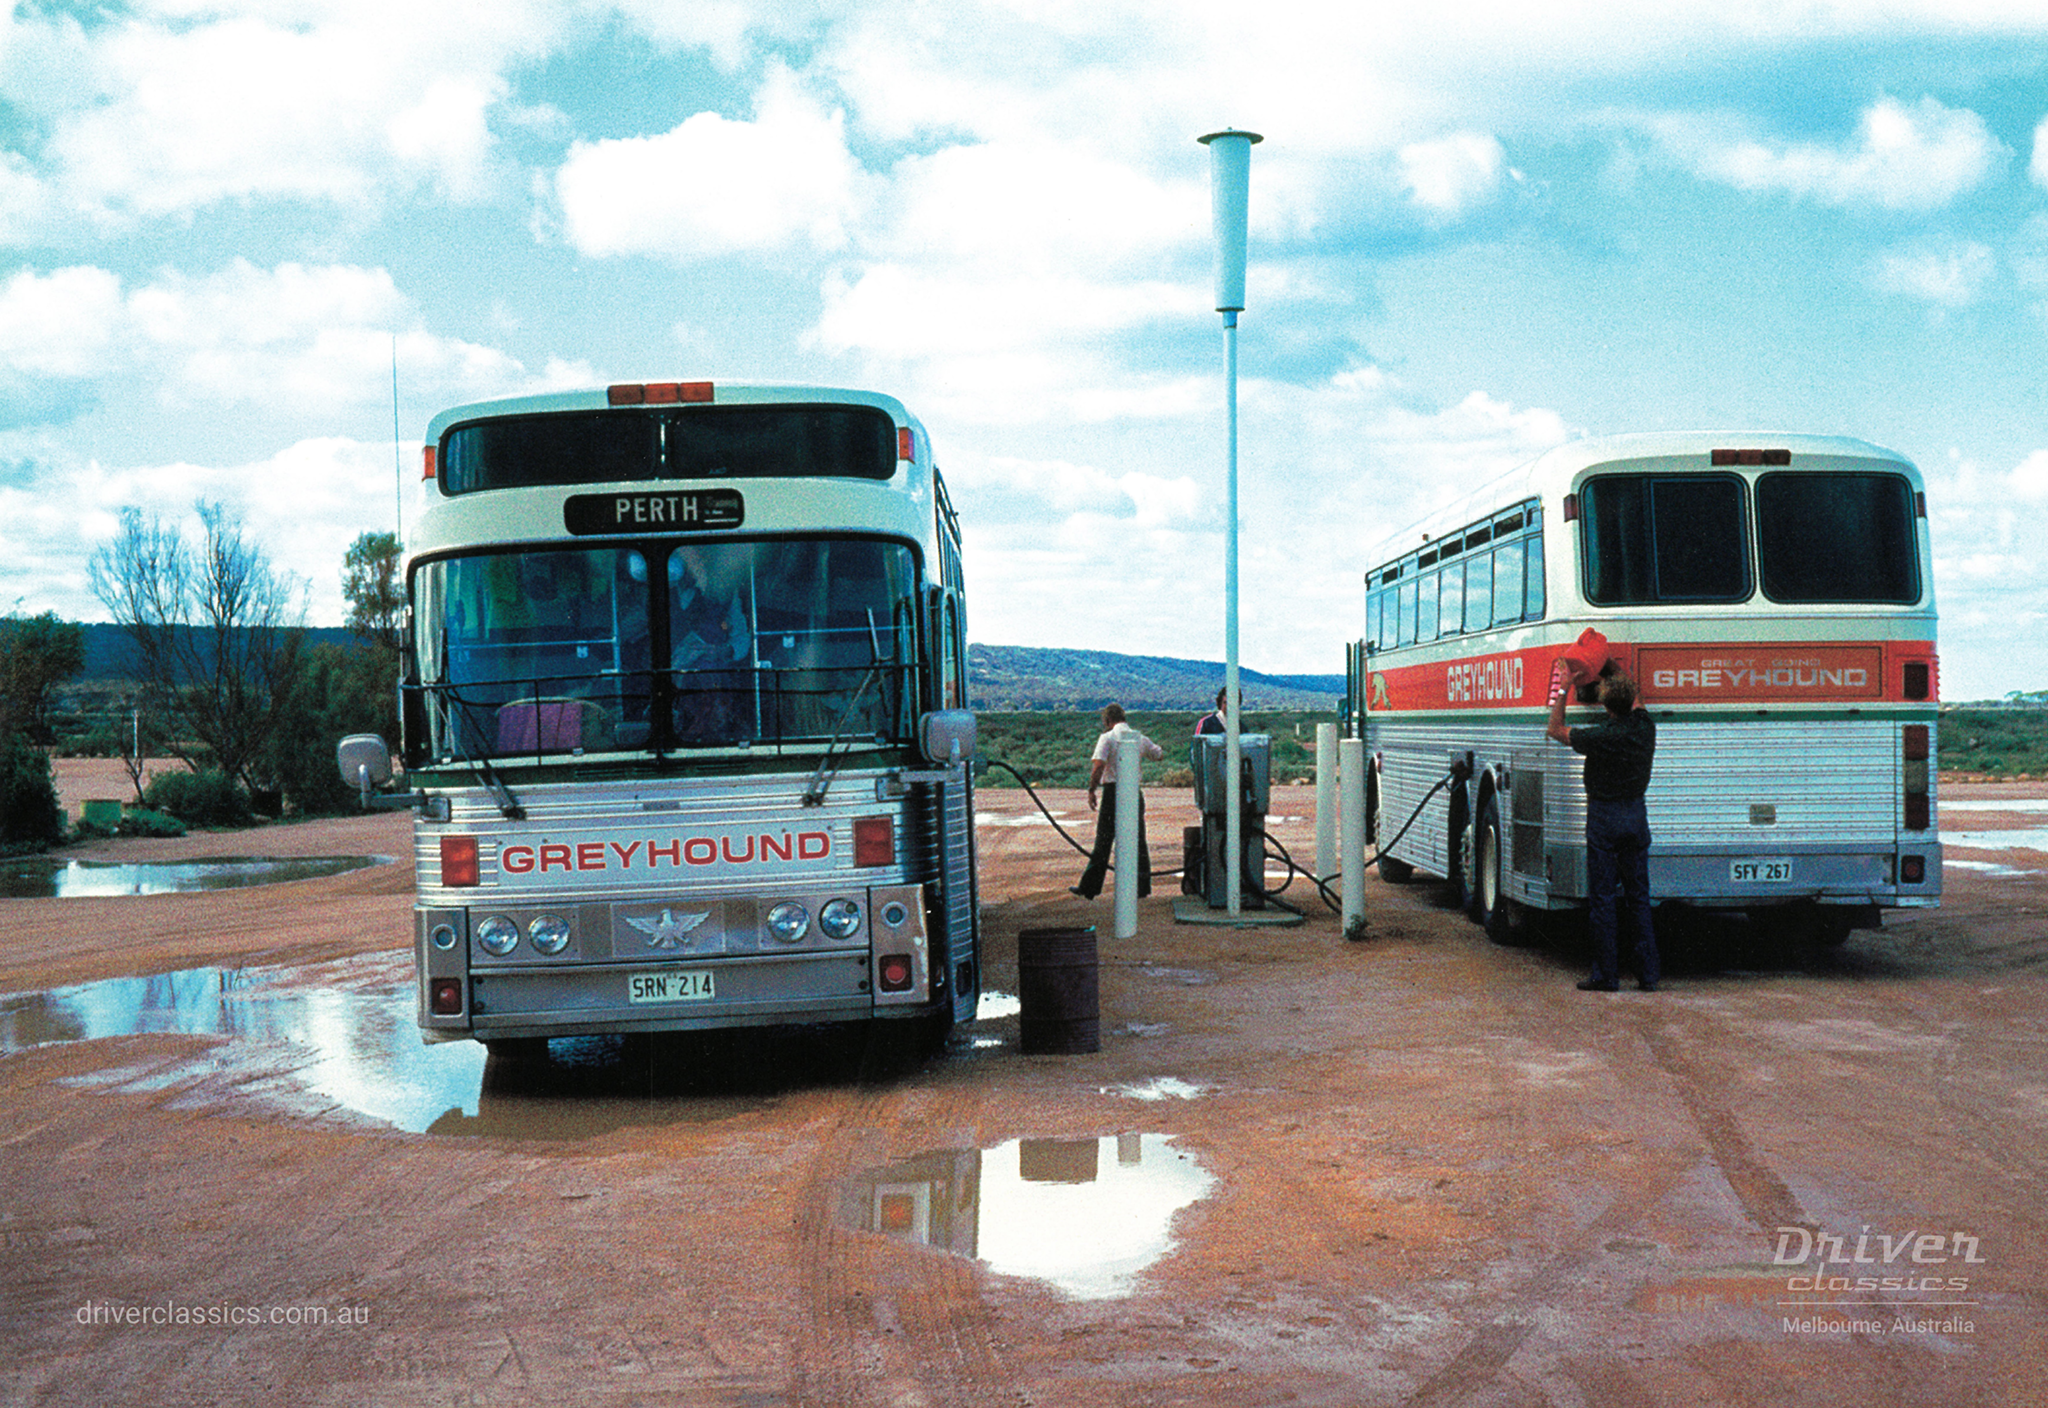 Eagle Model 05 buses, 1975 and 1977 models, Nullarbor Plain WA, photo taken late 1970's